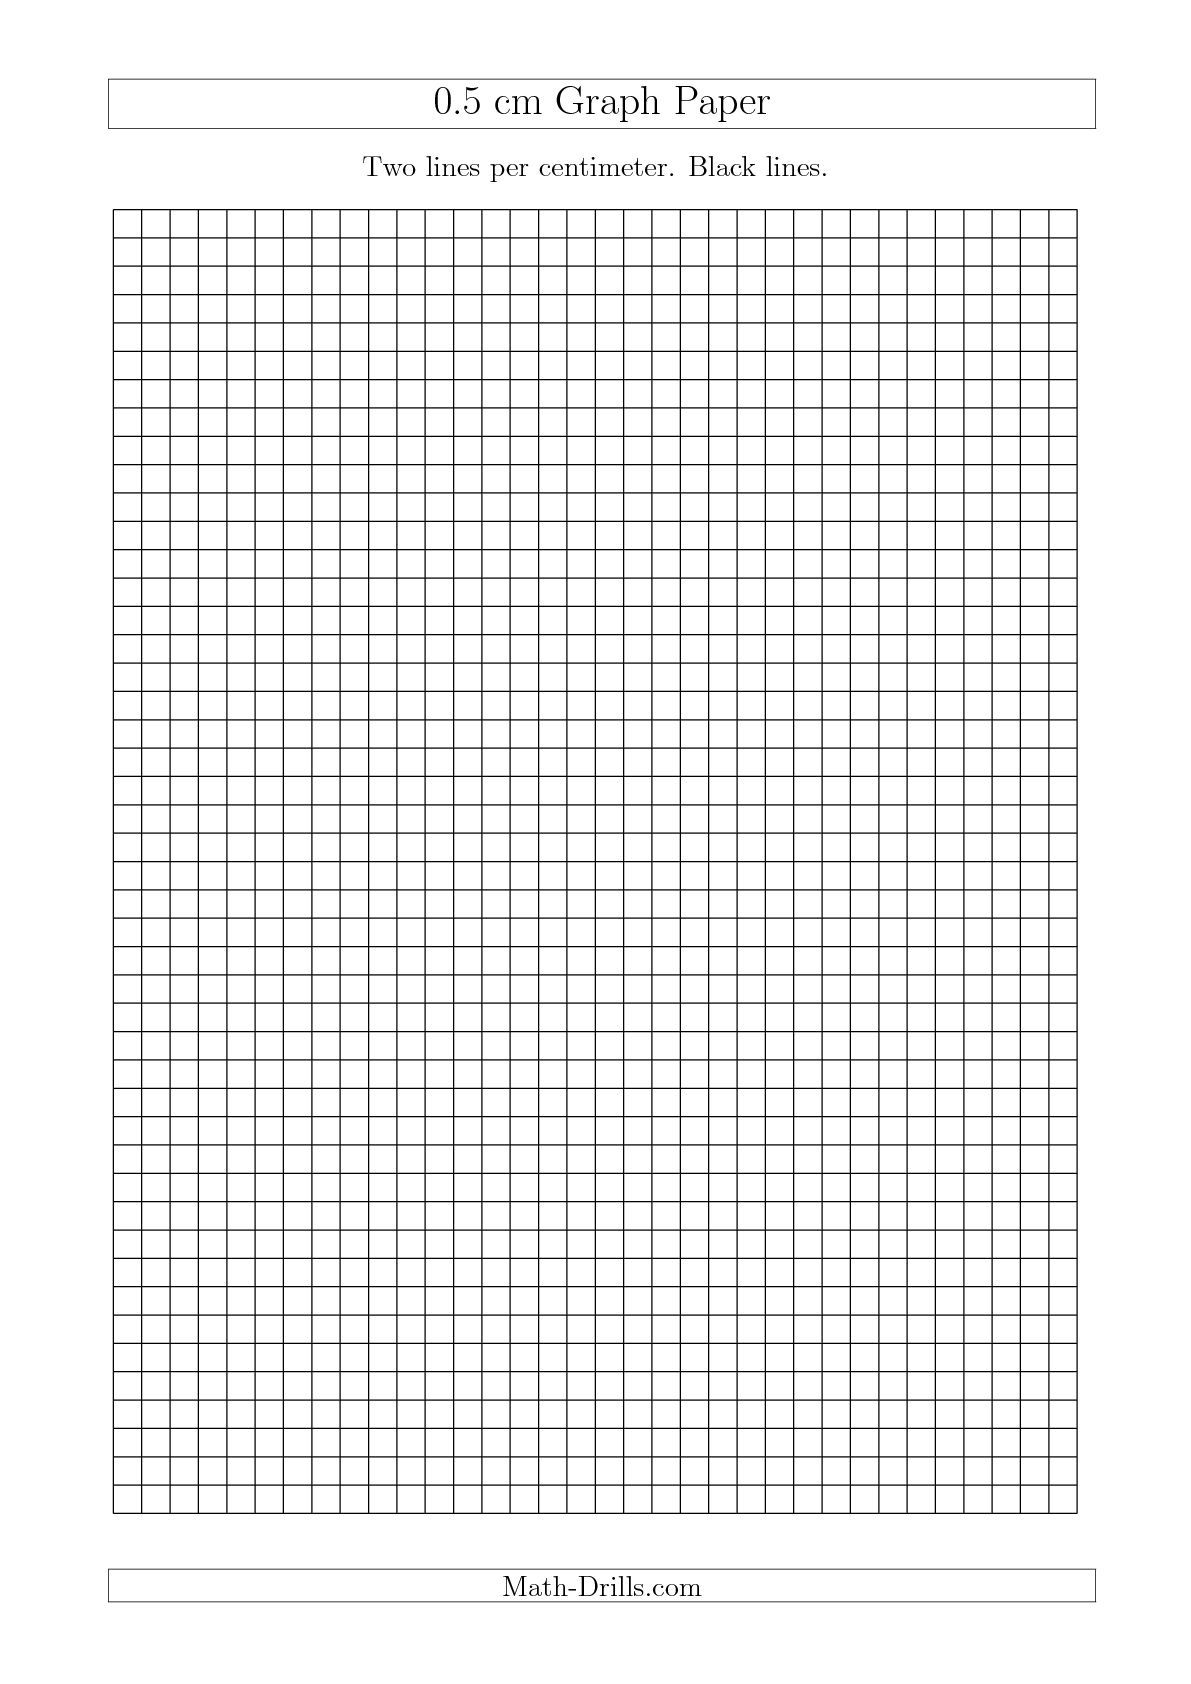 The 0.5 cm Graph Paper with Black Lines (A4 Size) (A) math worksheet ...